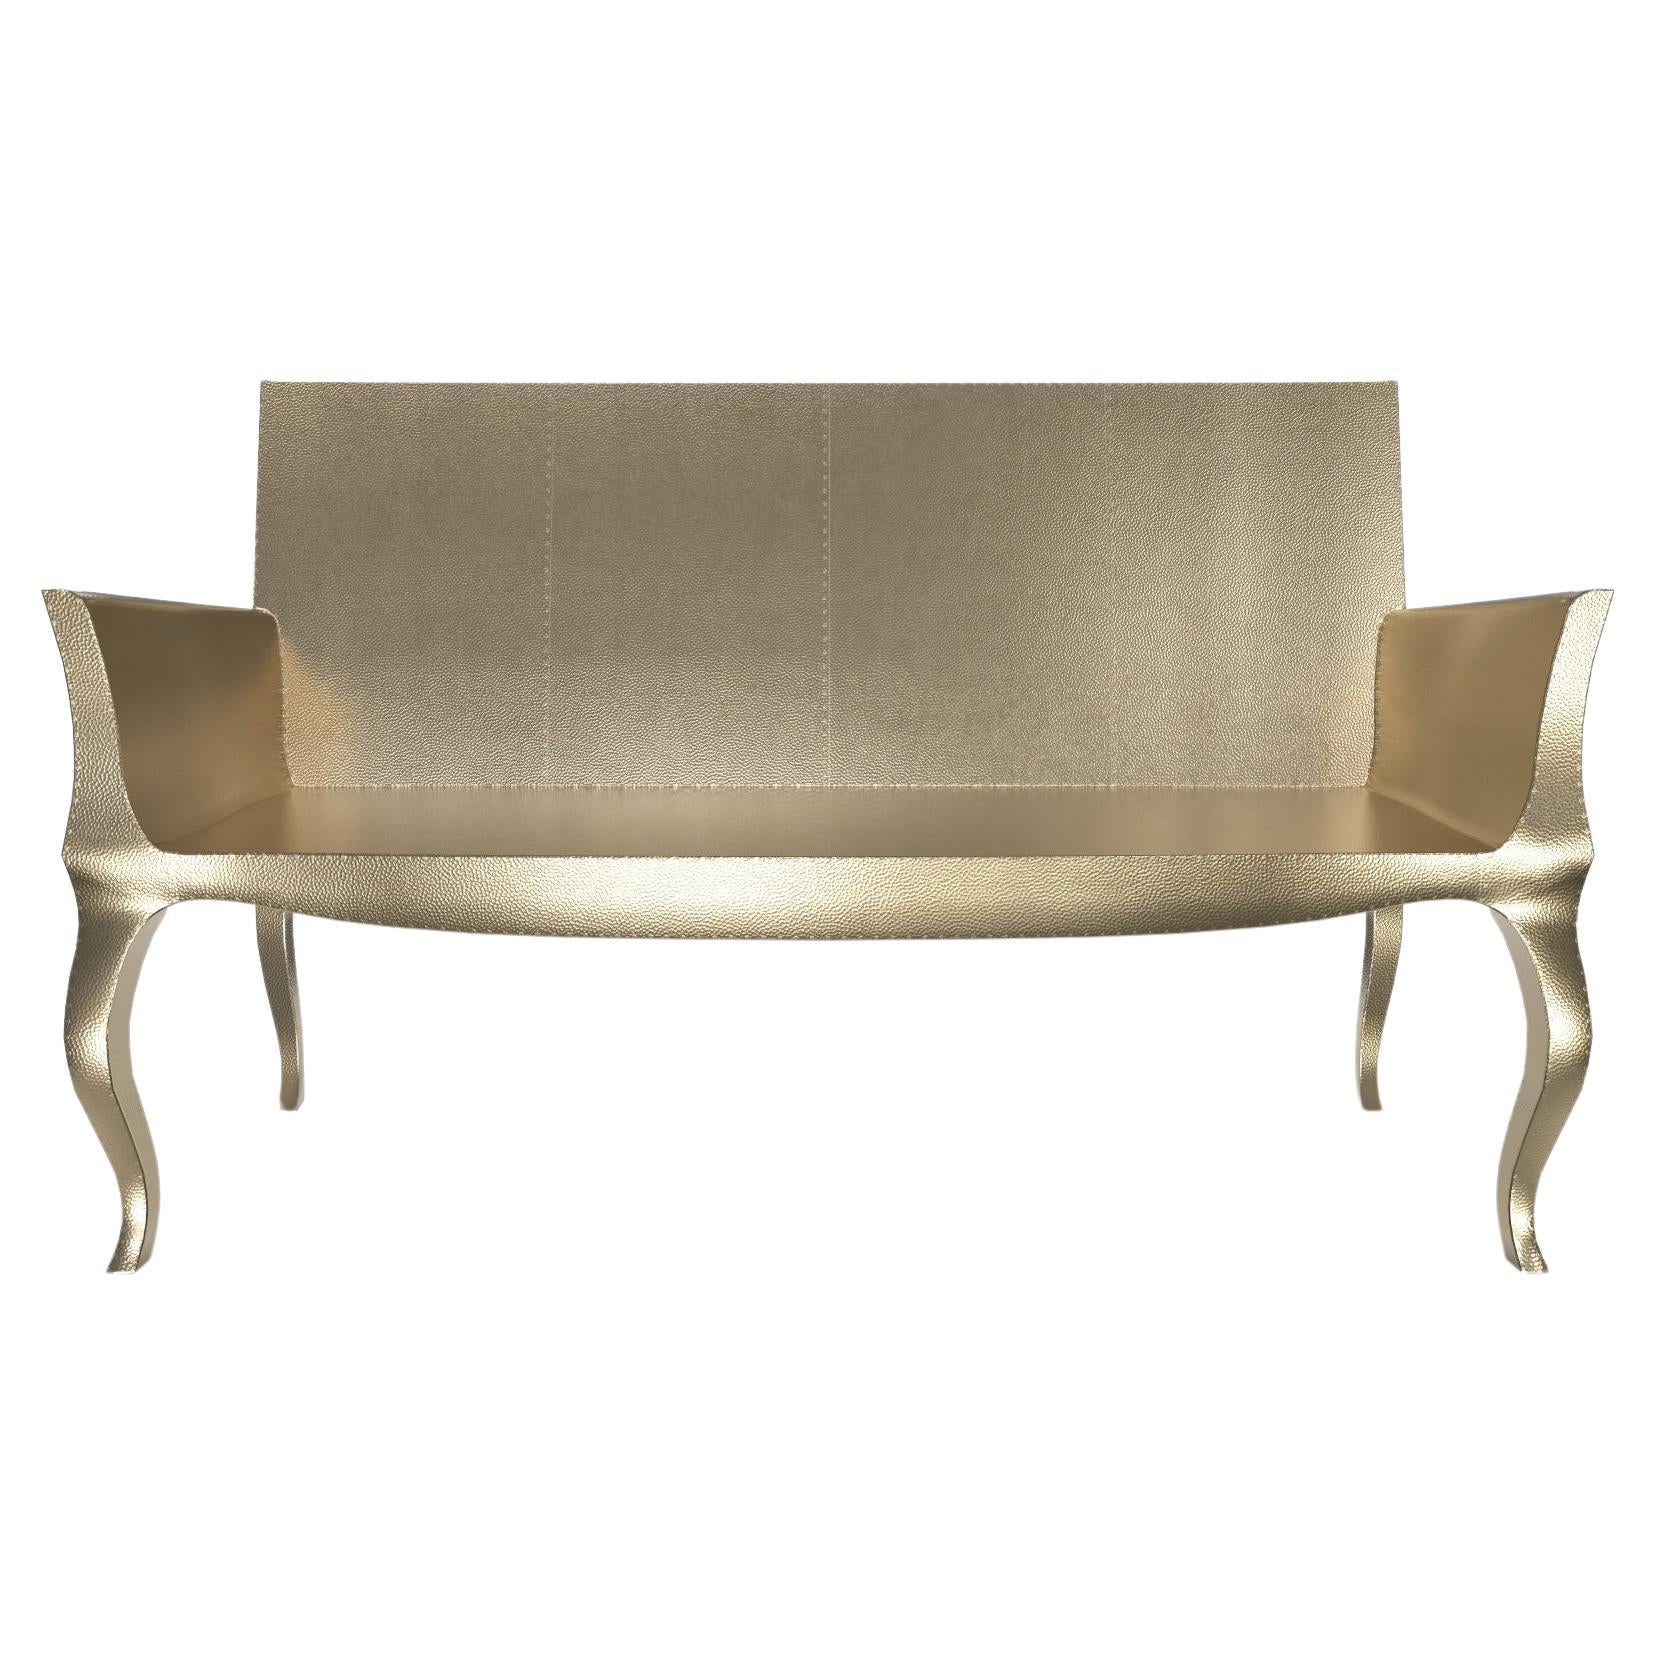 Louise Settee Art Deco Living Room Sets in Mid. Hammered Brass by Paul Mathieu